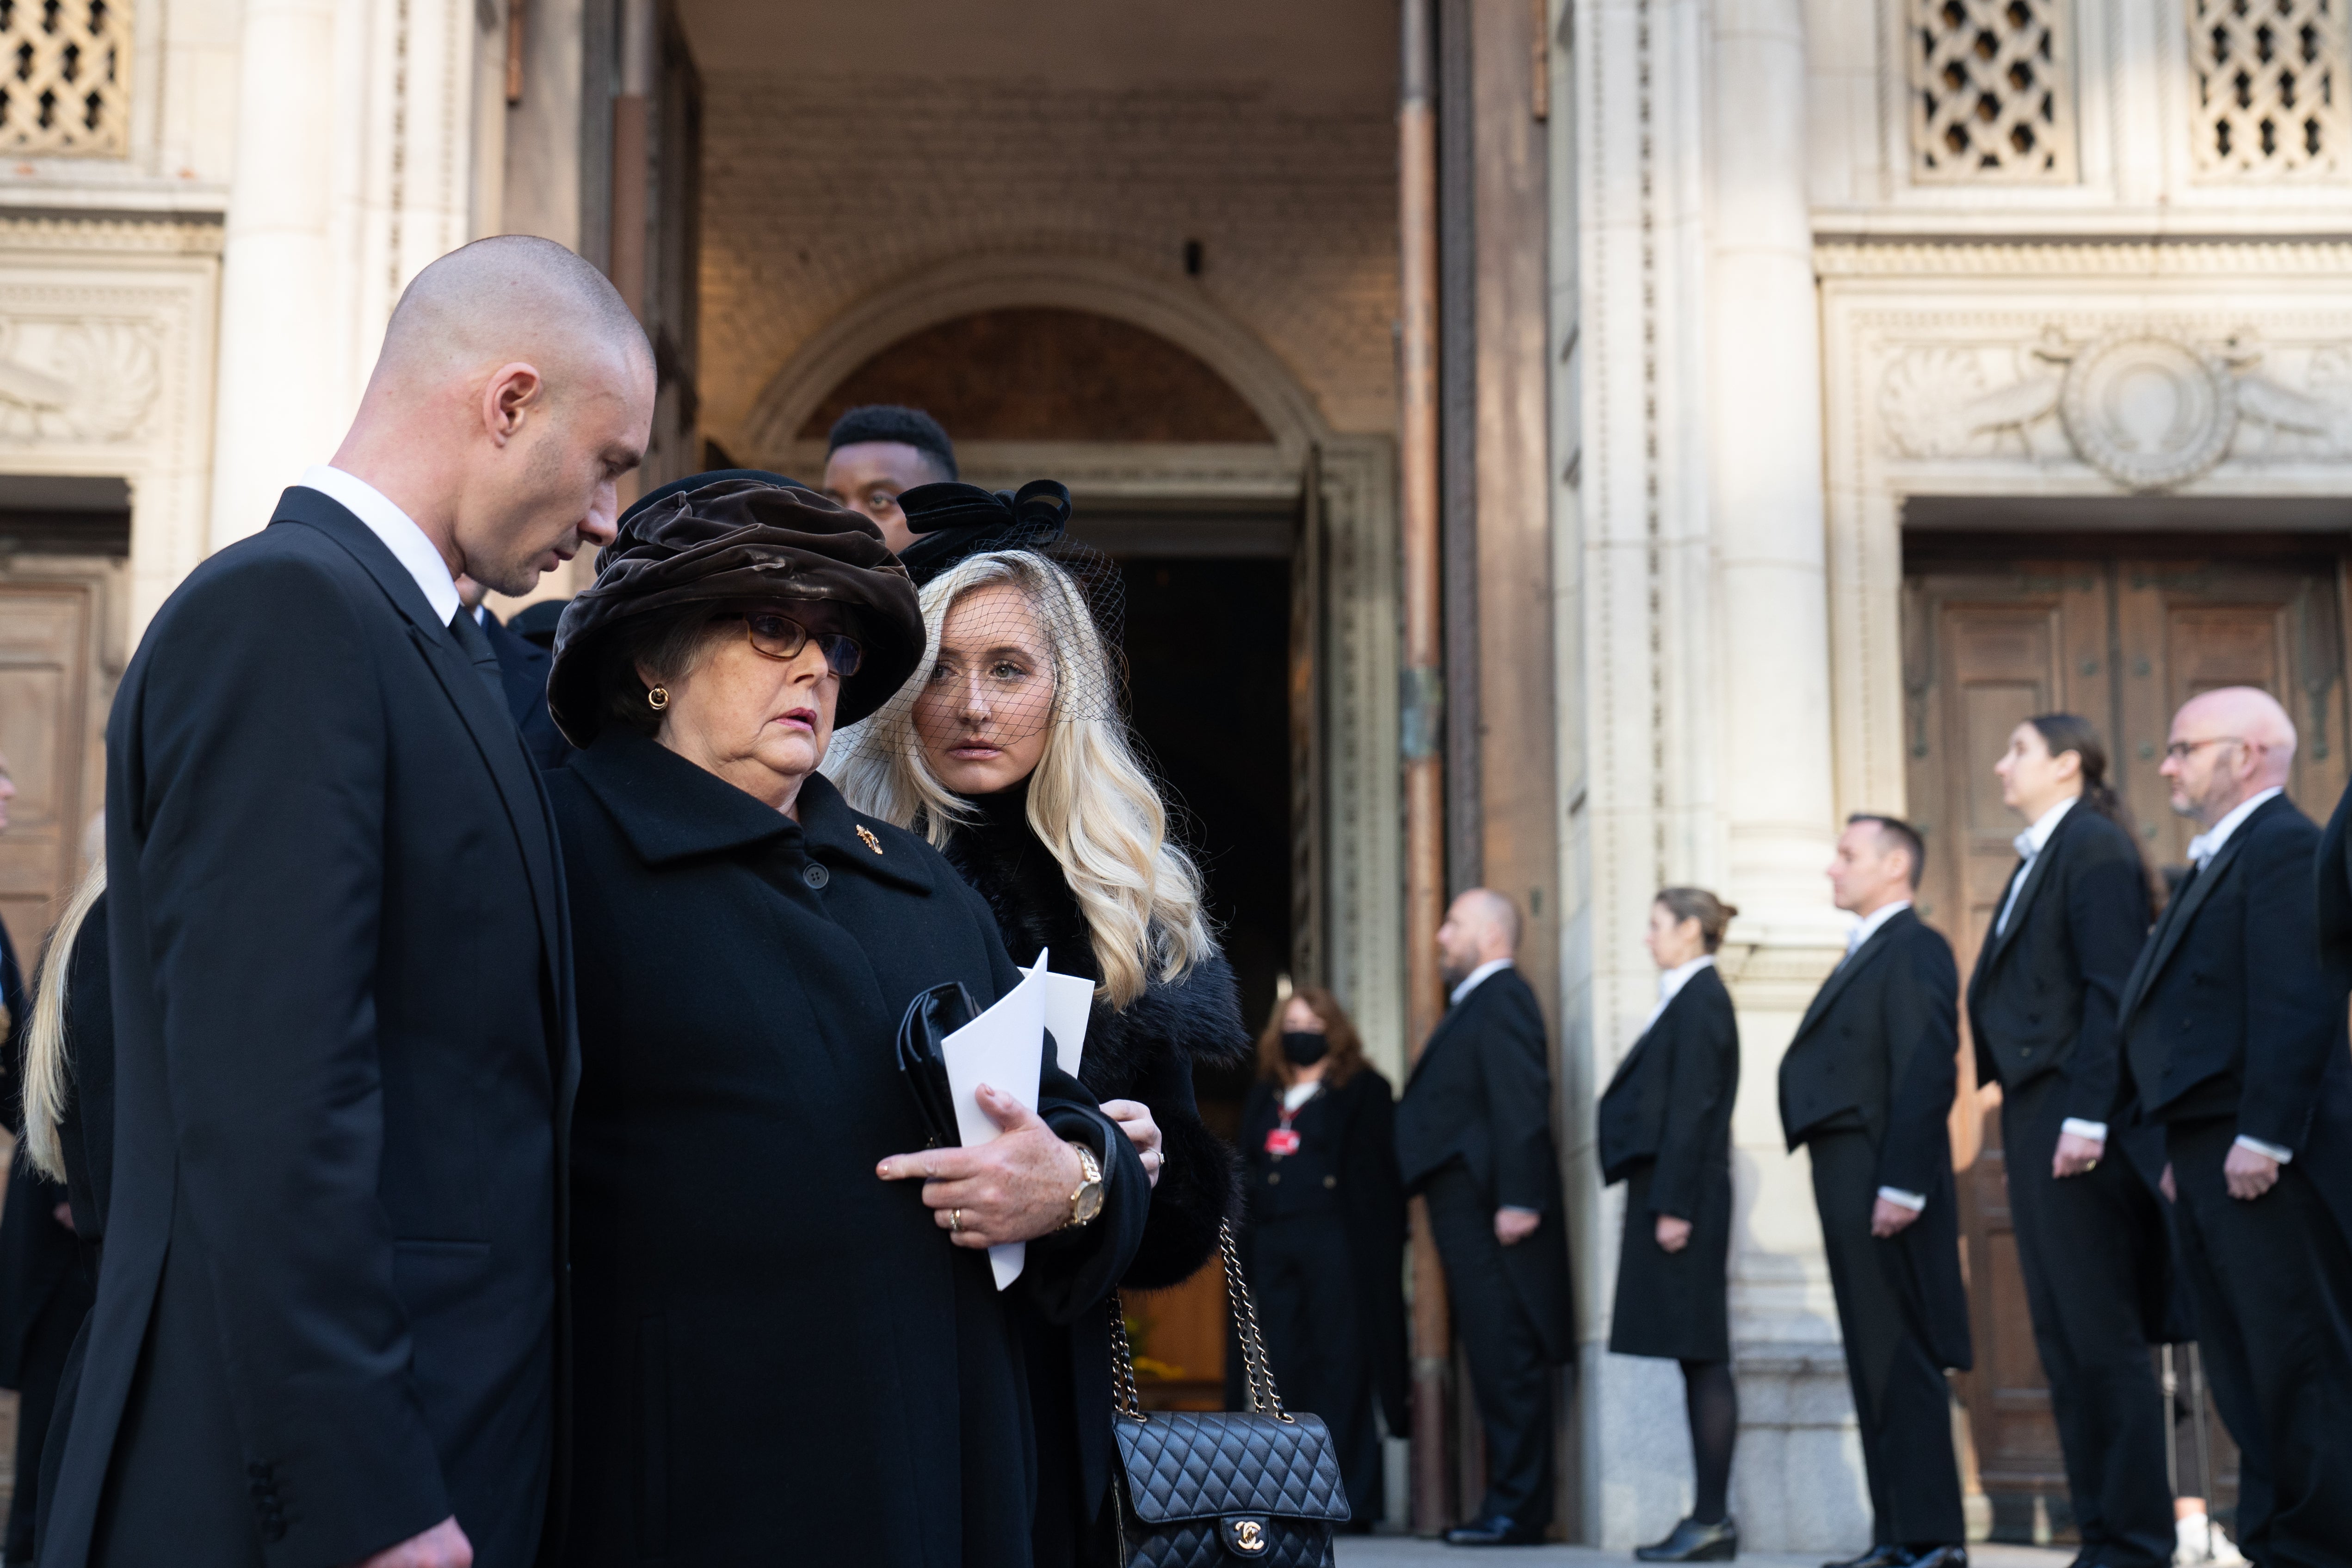 Julia Amess (centre), the widow of Sir David, is comforted by her family following the requiem mass for Sir David at Westminster Cathedral